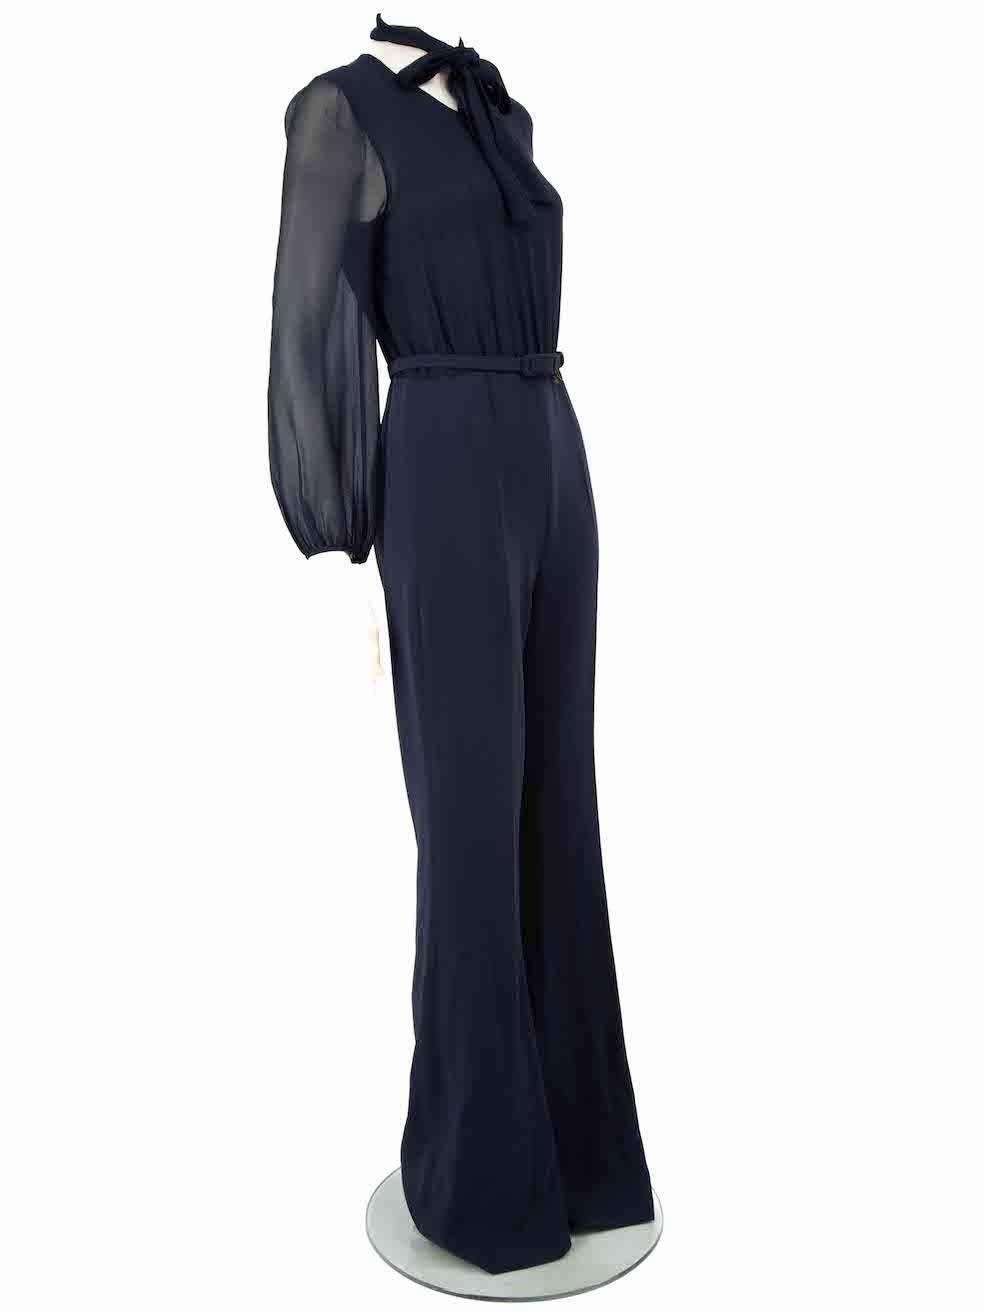 CONDITION is Very good. Hardly any visible wear to jumpsuit is evident on this used Max Mara designer resale item.
 
 
 
 Details
 
 
 Navy
 
 Silk
 
 Jumpsuit
 
 Sheer top and sleeves
 
 Round neck
 
 Wide leg
 
 Back zip fastening
 
 Belt